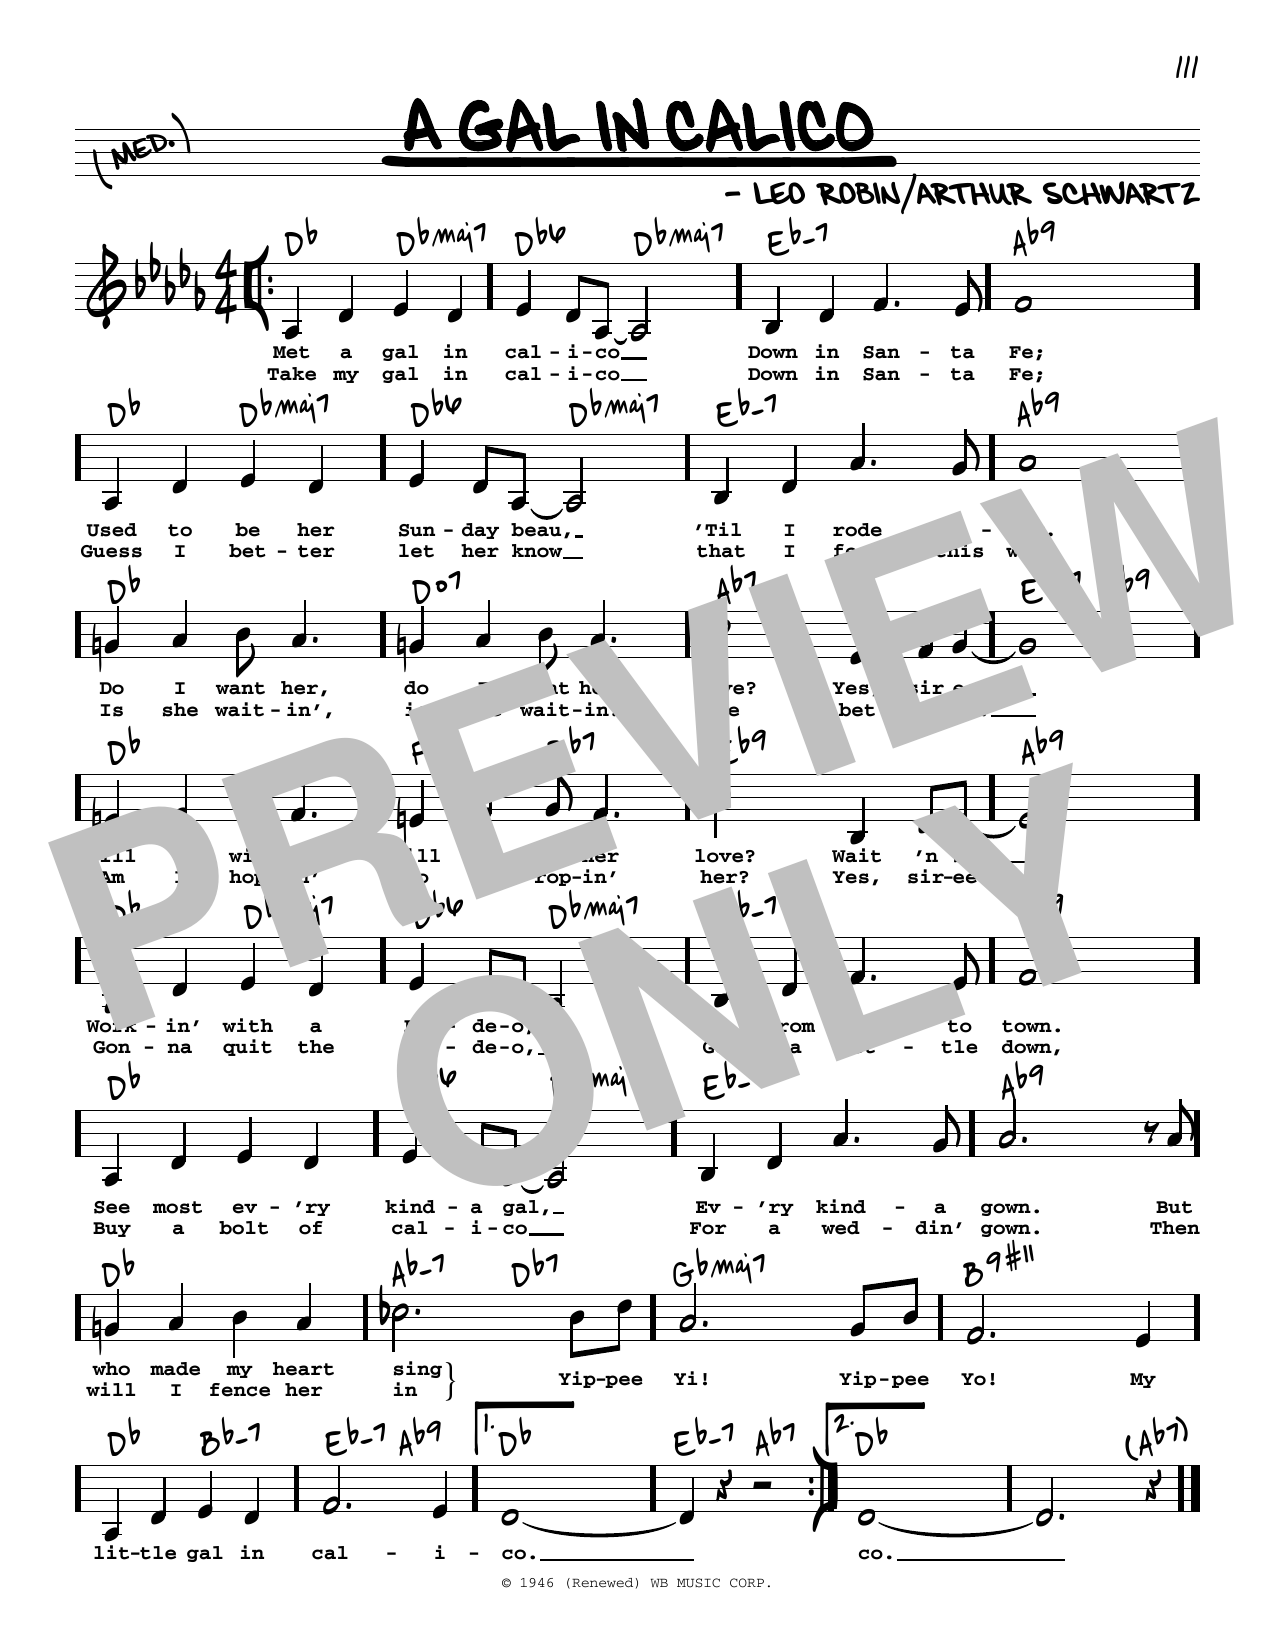 Download Leo Robin and Arthur Schwartz A Gal In Calico (Low Voice) Sheet Music